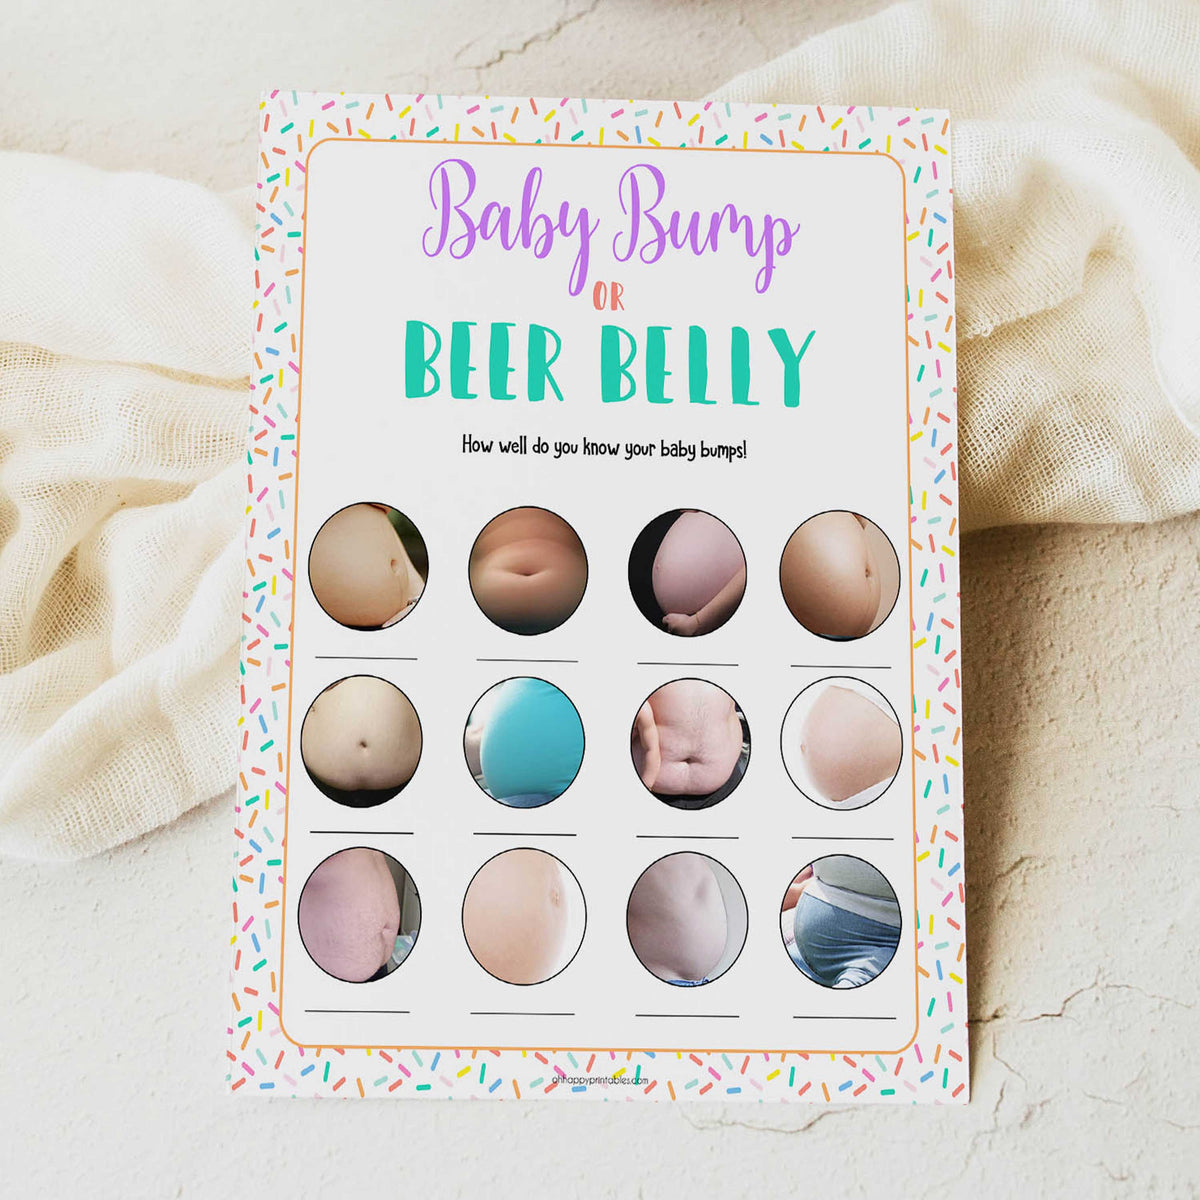 Baby sprinkle games, baby bump or beer belly game, printable baby games, baby shower games, baby spring theme, popular baby games, fun baby games, baby shower ideas